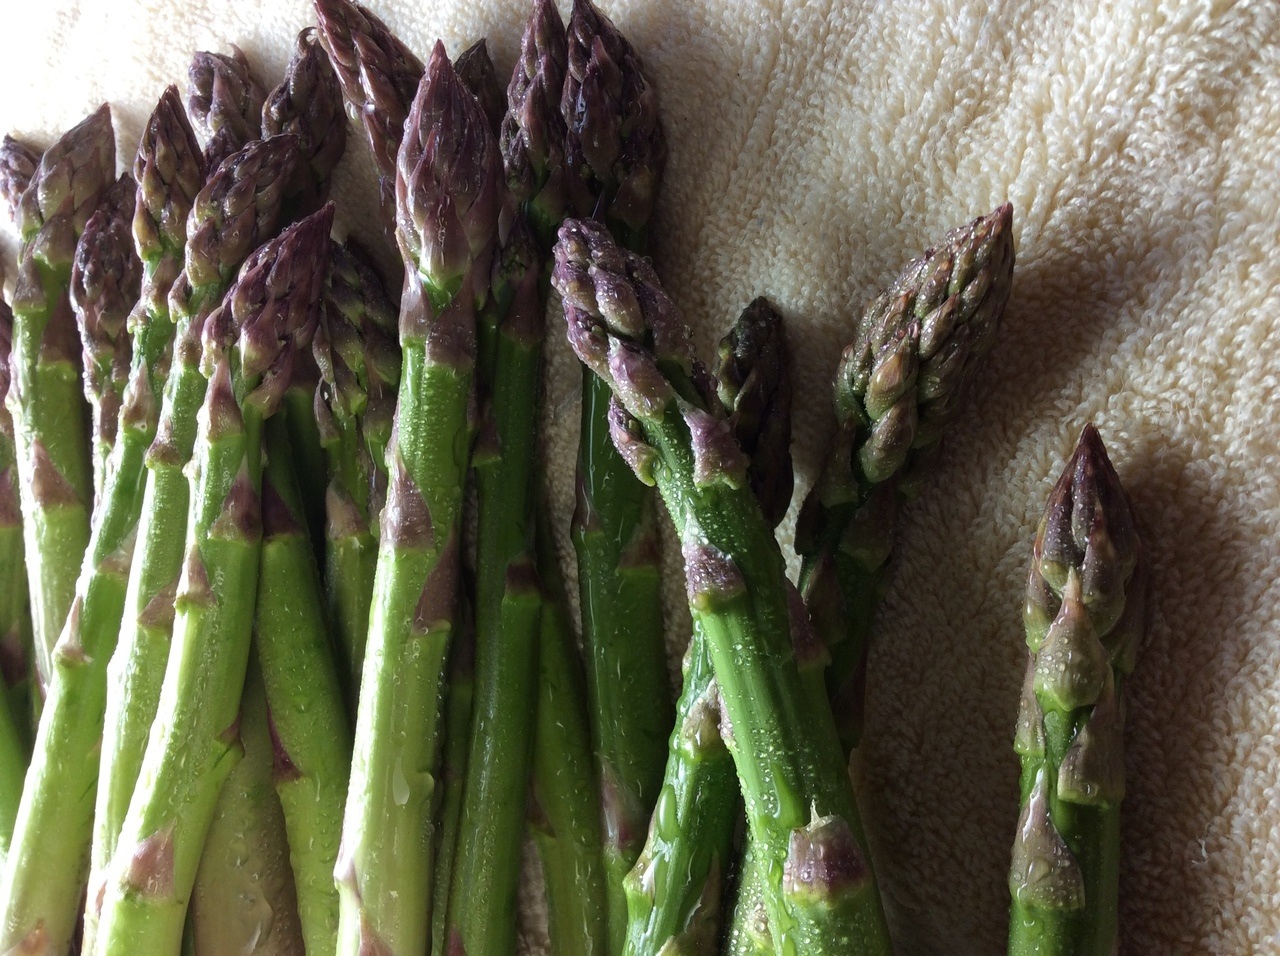 Asparagus is coming into season. Don’t get stuck in a rut of just steaming it.